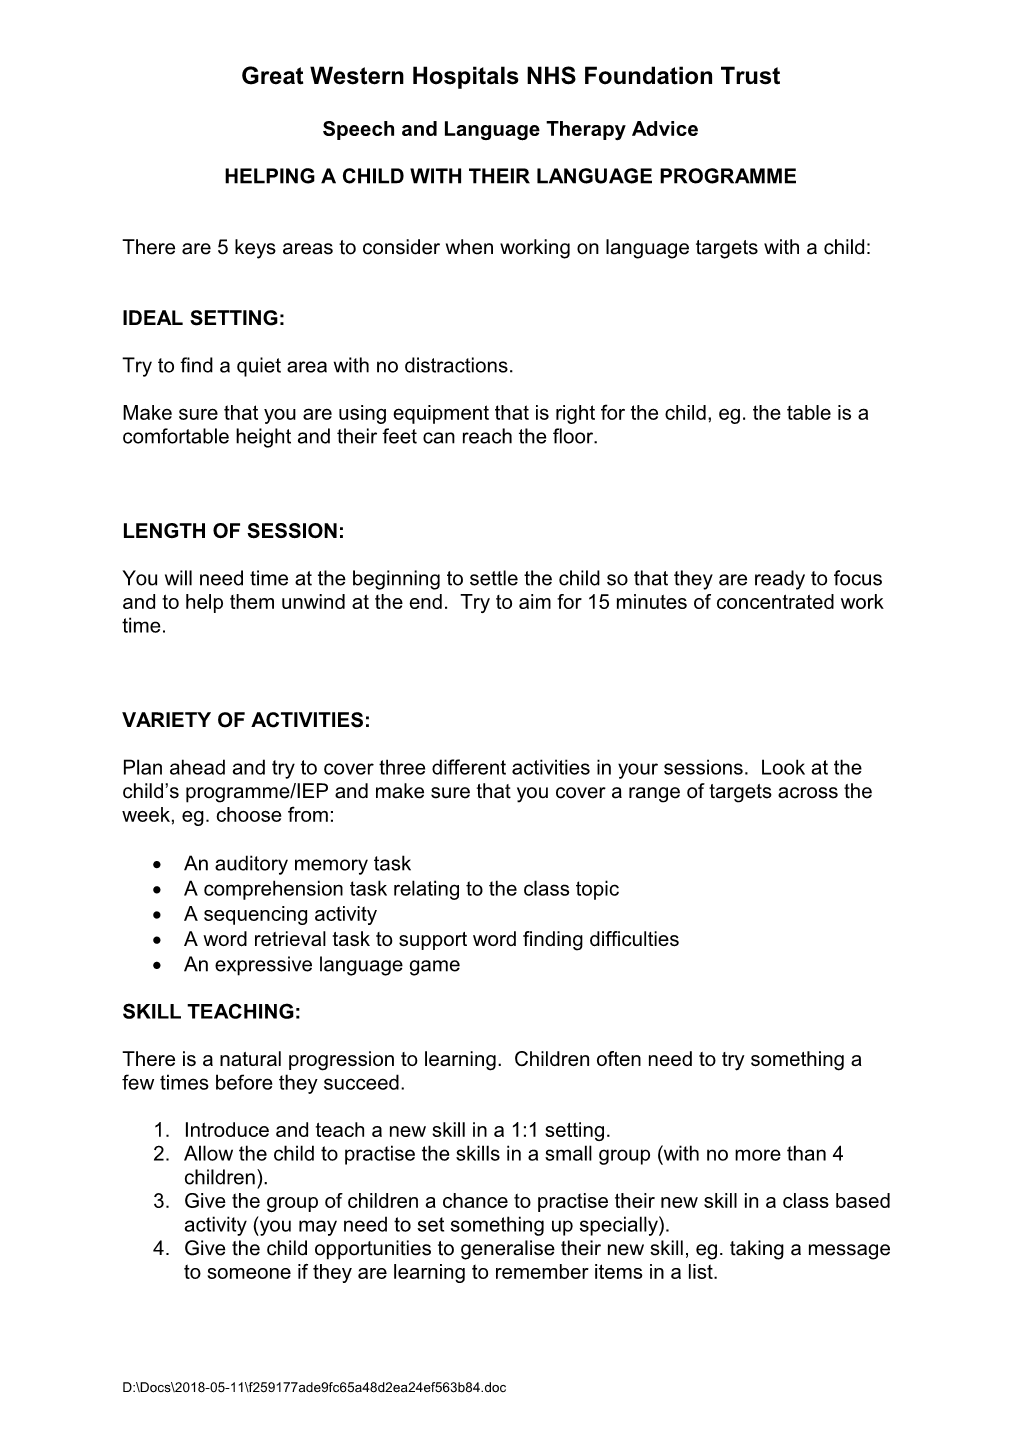 Speech and Language Therapy Advice Sheets s2